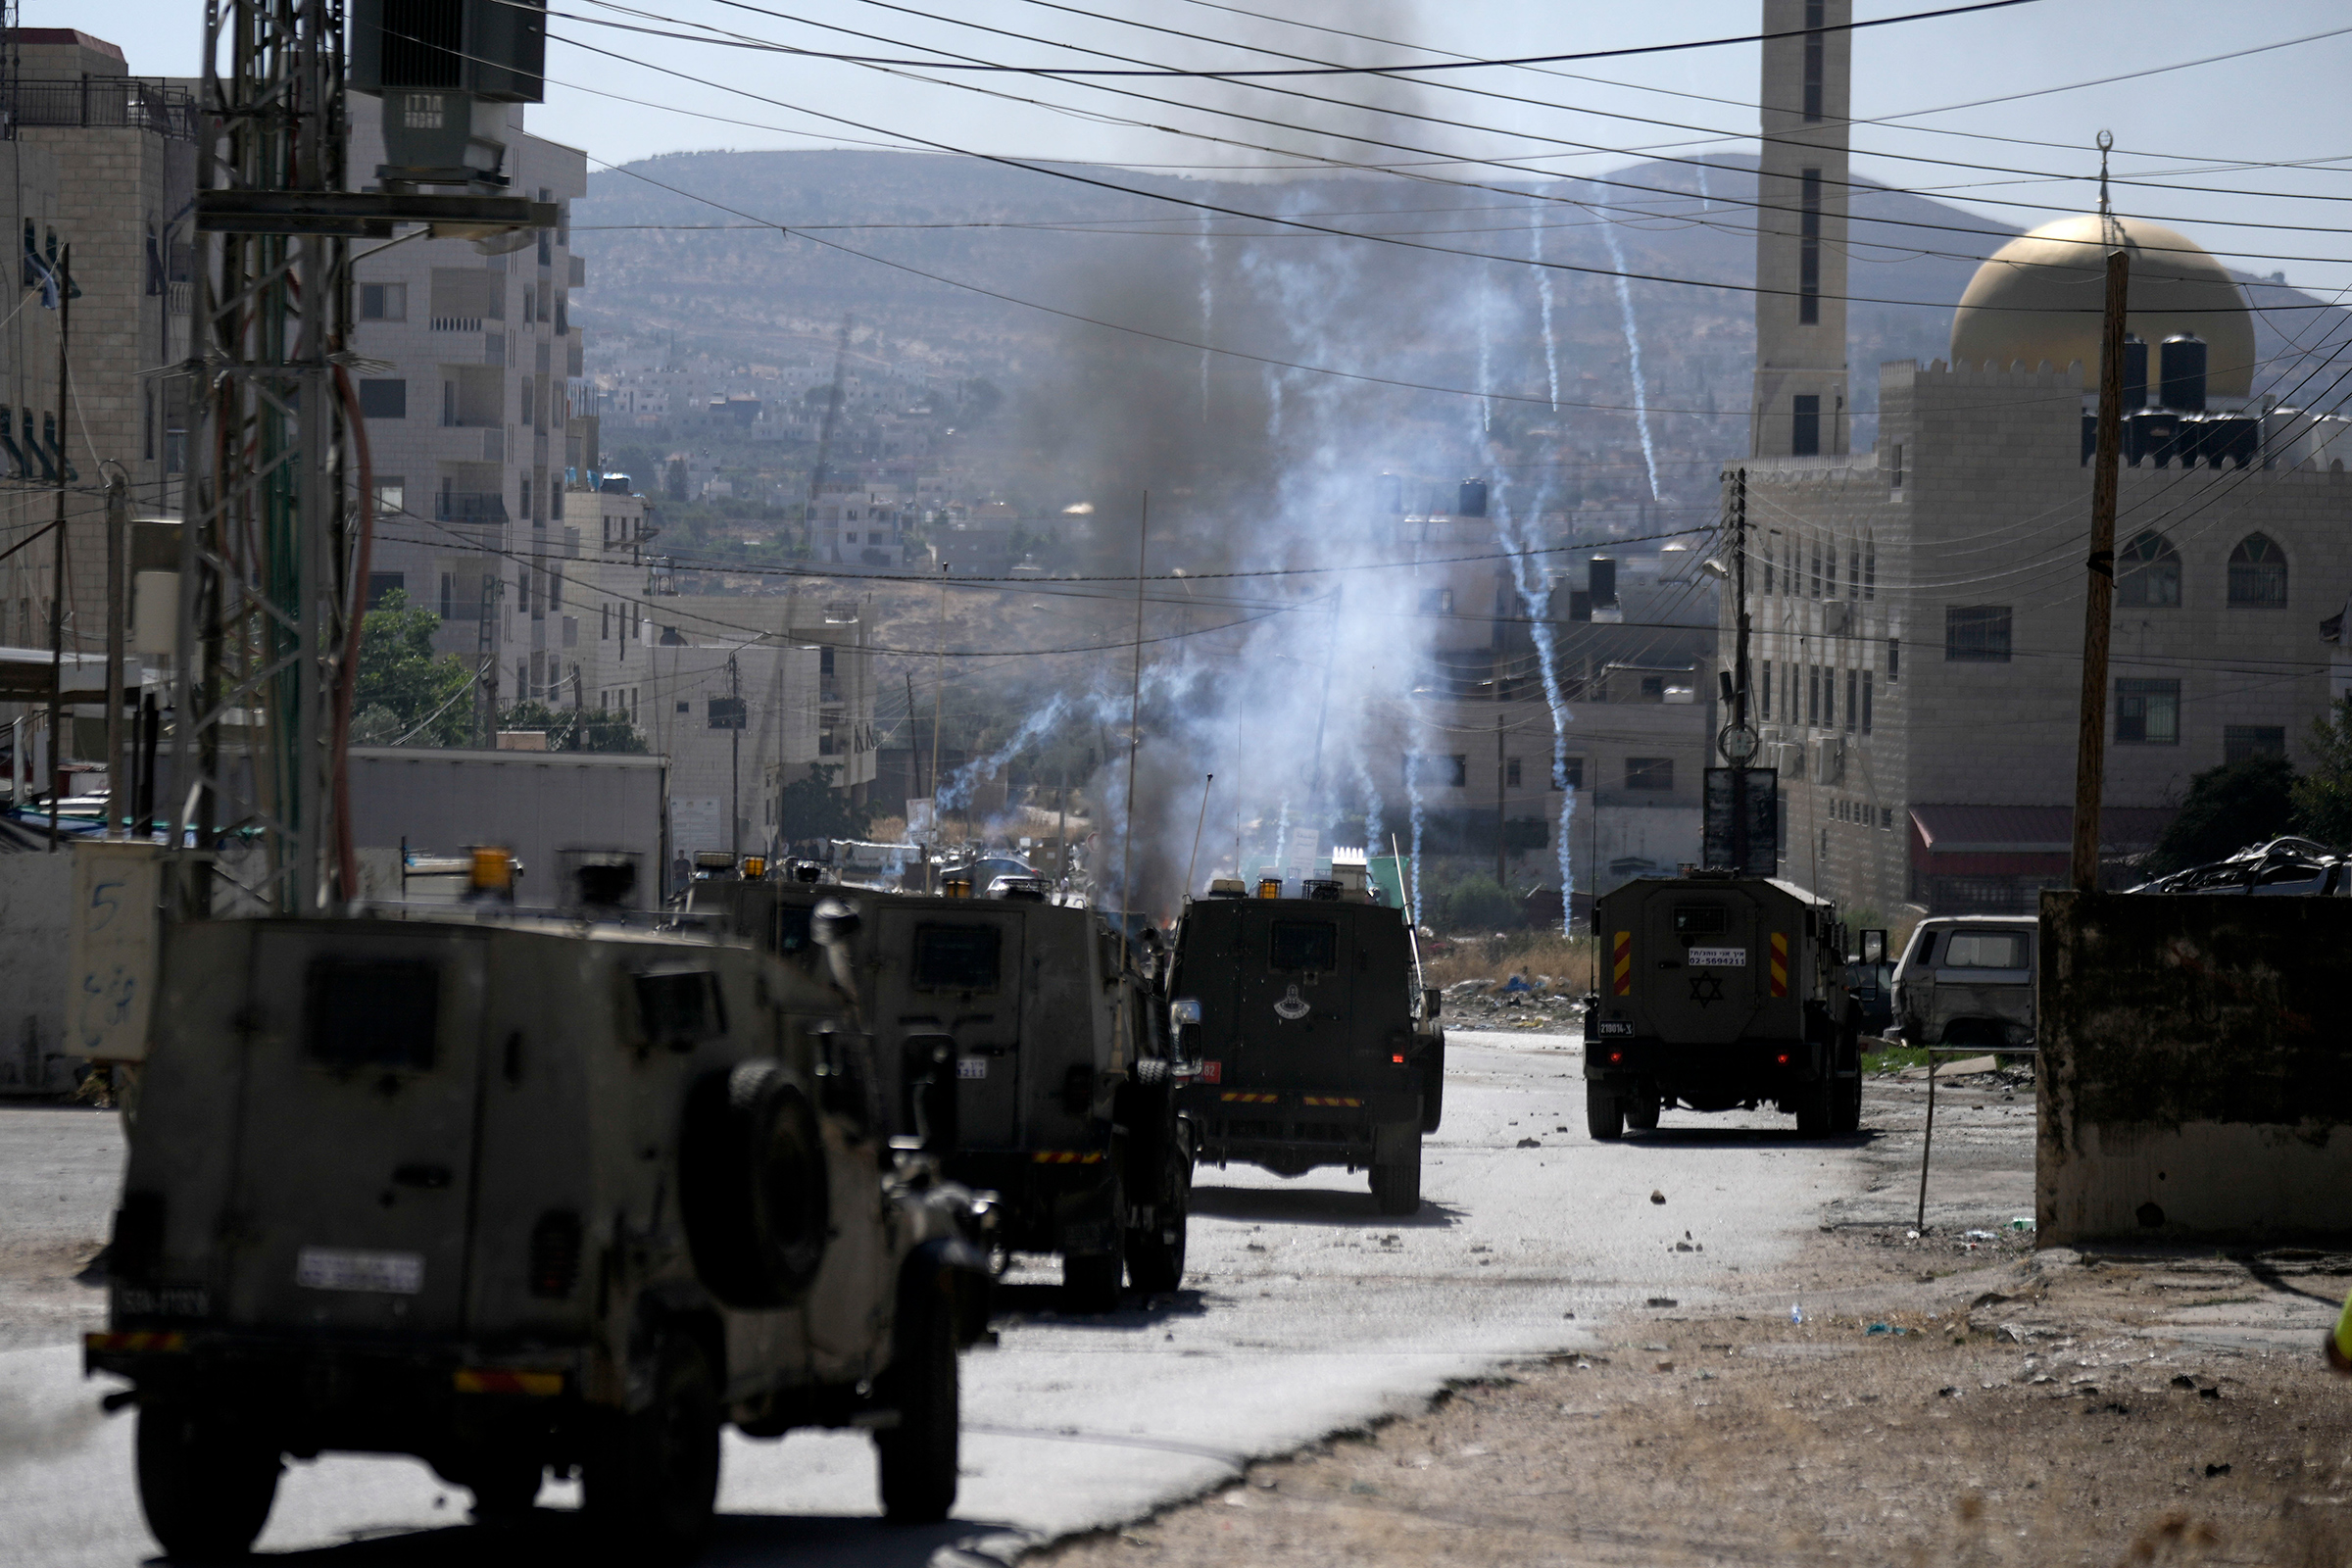 An Israeli military vehicle fires tear gas towards Palestinian protesters during a military raid in the Askar refugee camp the West Bank city of Nablus on July 24.